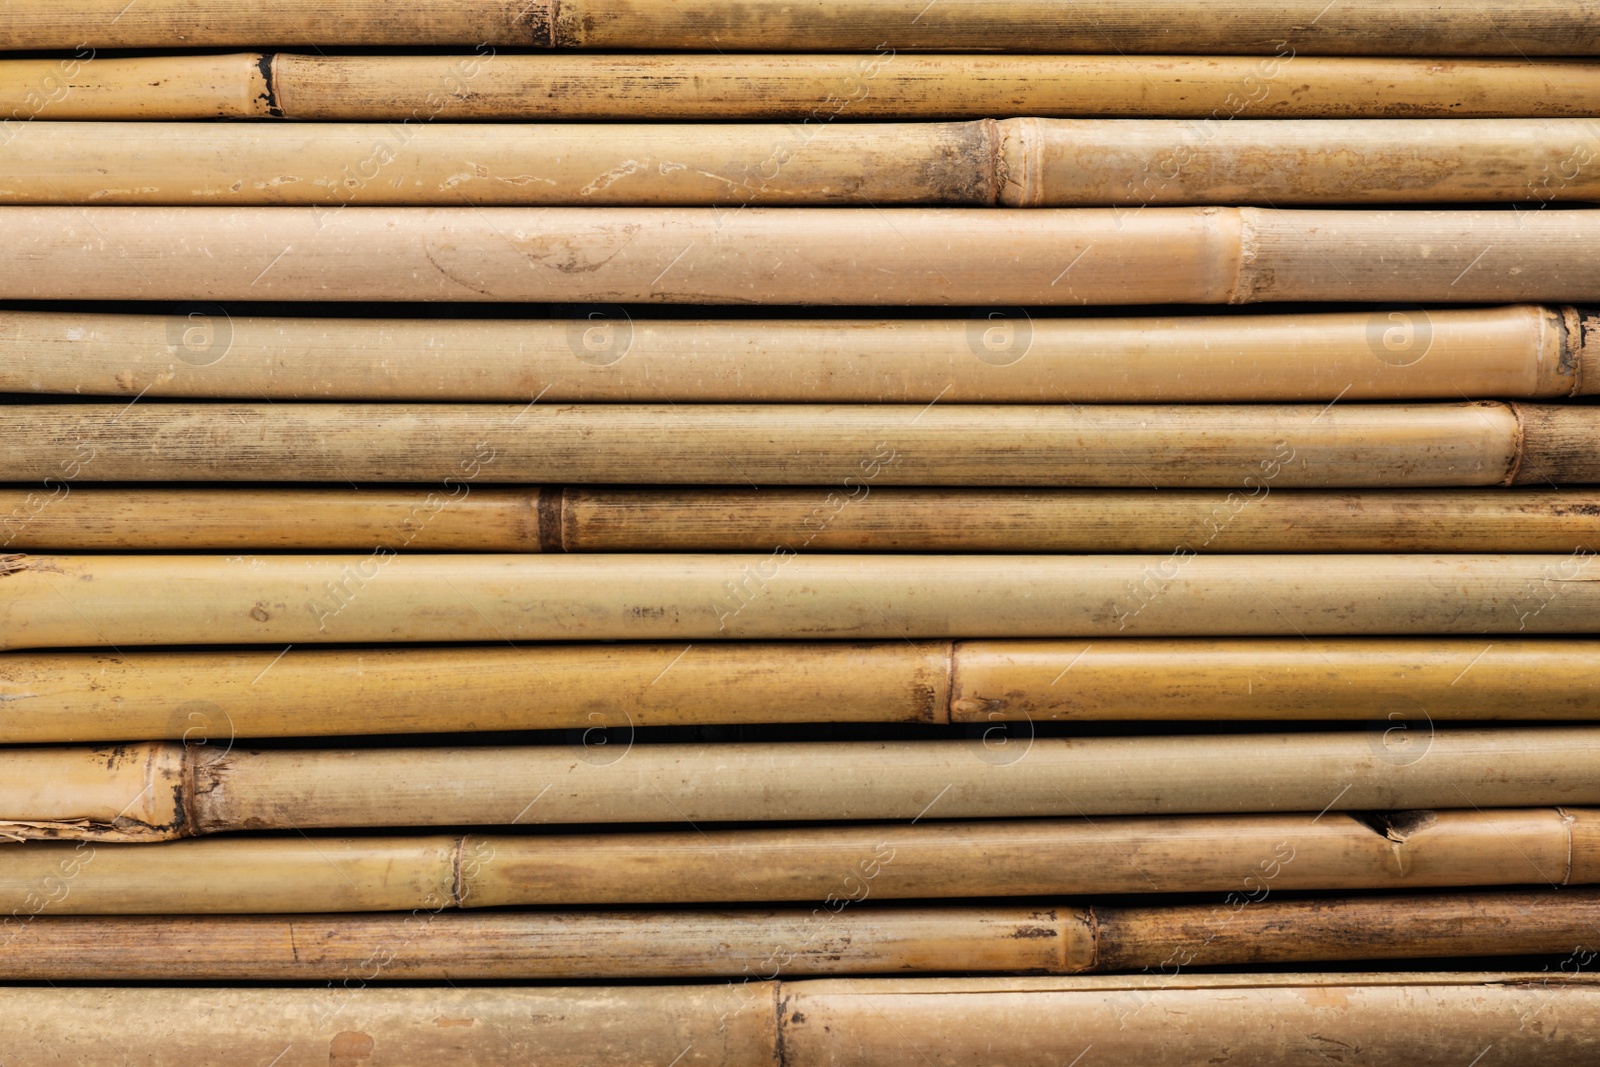 Photo of Dry bamboo sticks as background, top view